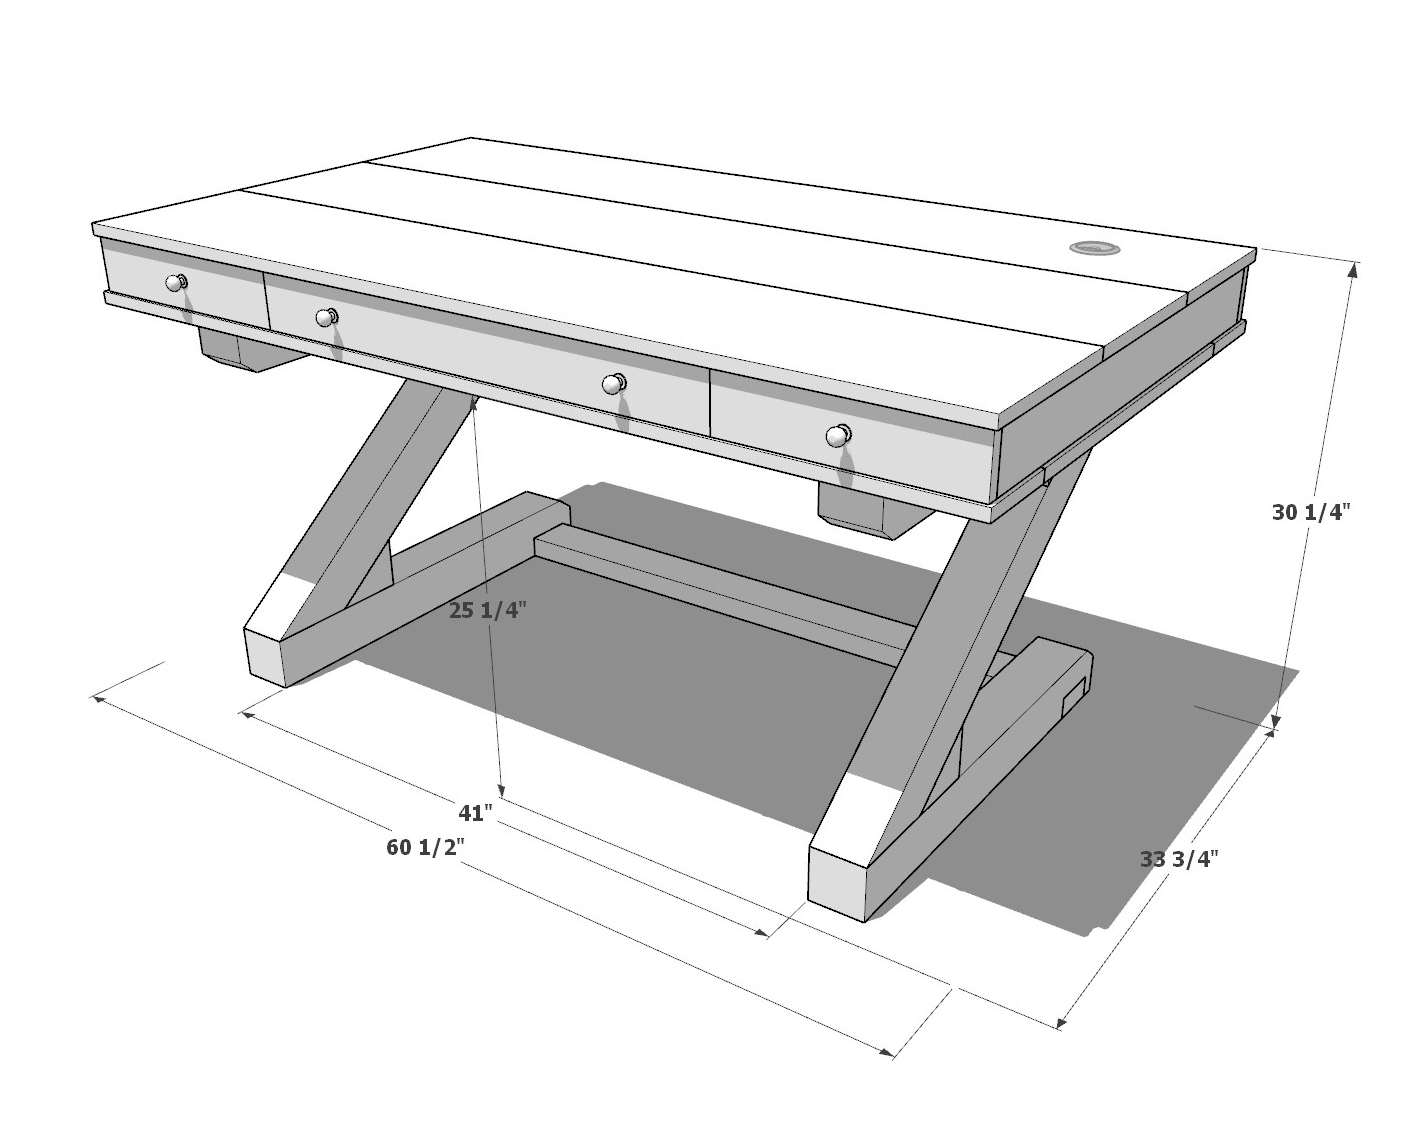 DIY Wooden Desk Plan: A Step-by-Step Guide to Build a Modern Executive Desk  - DIY projects plans